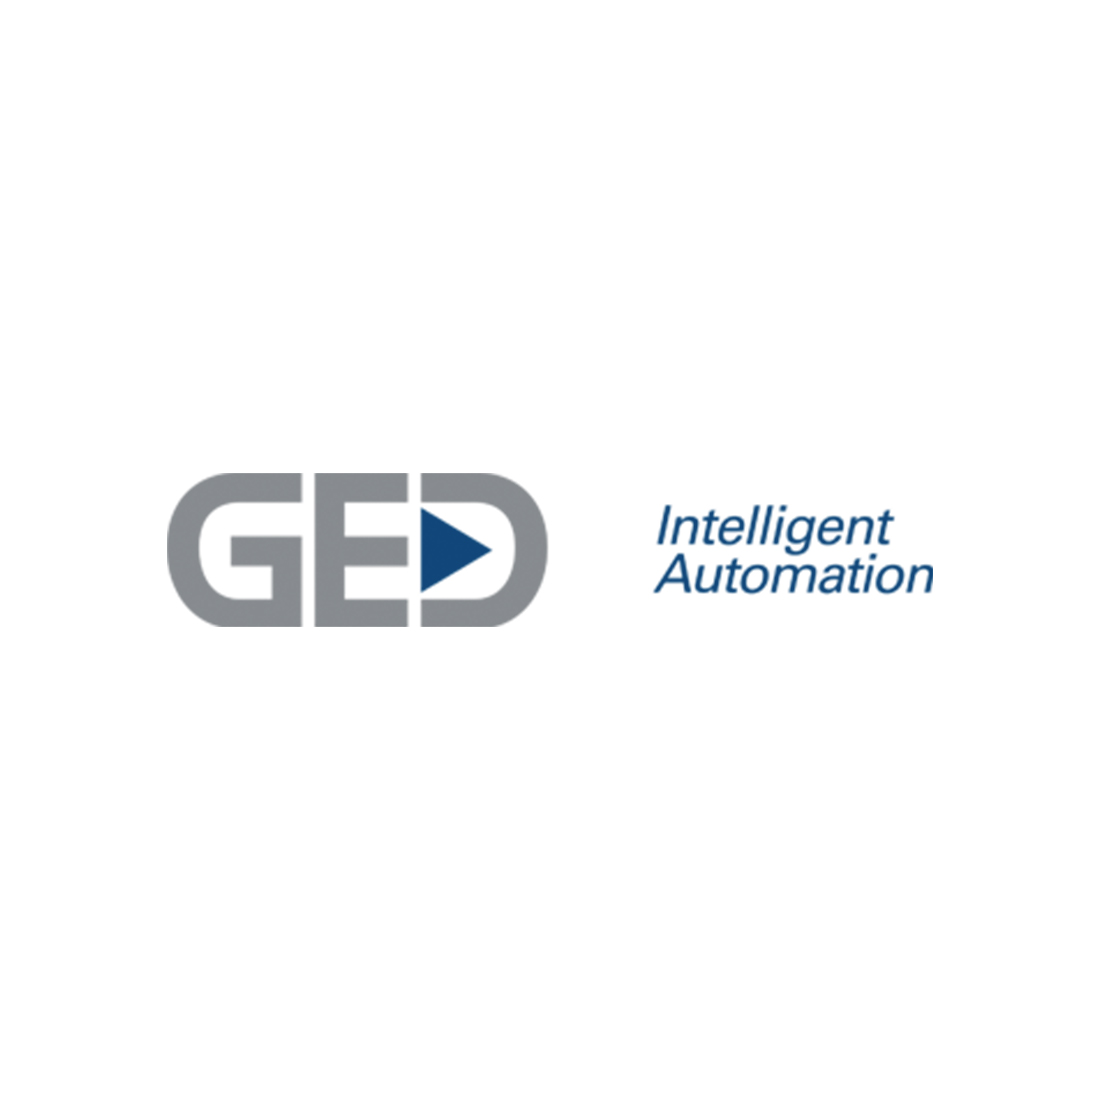 GED Integrated Solutions